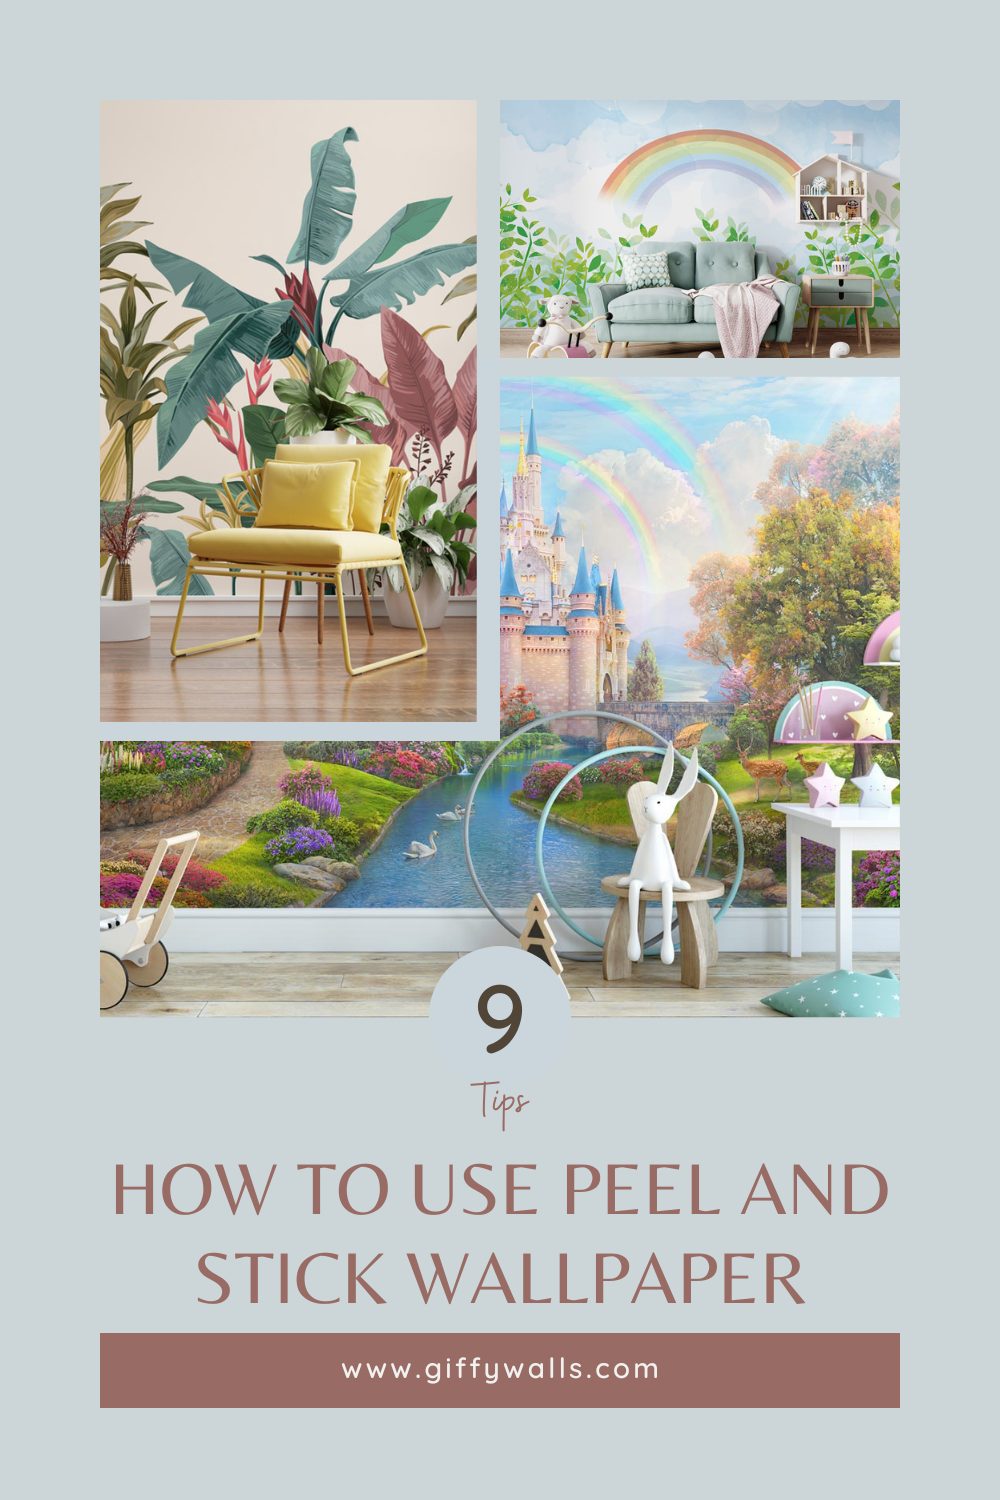 How to Apply Peel and Stick Wallpaper